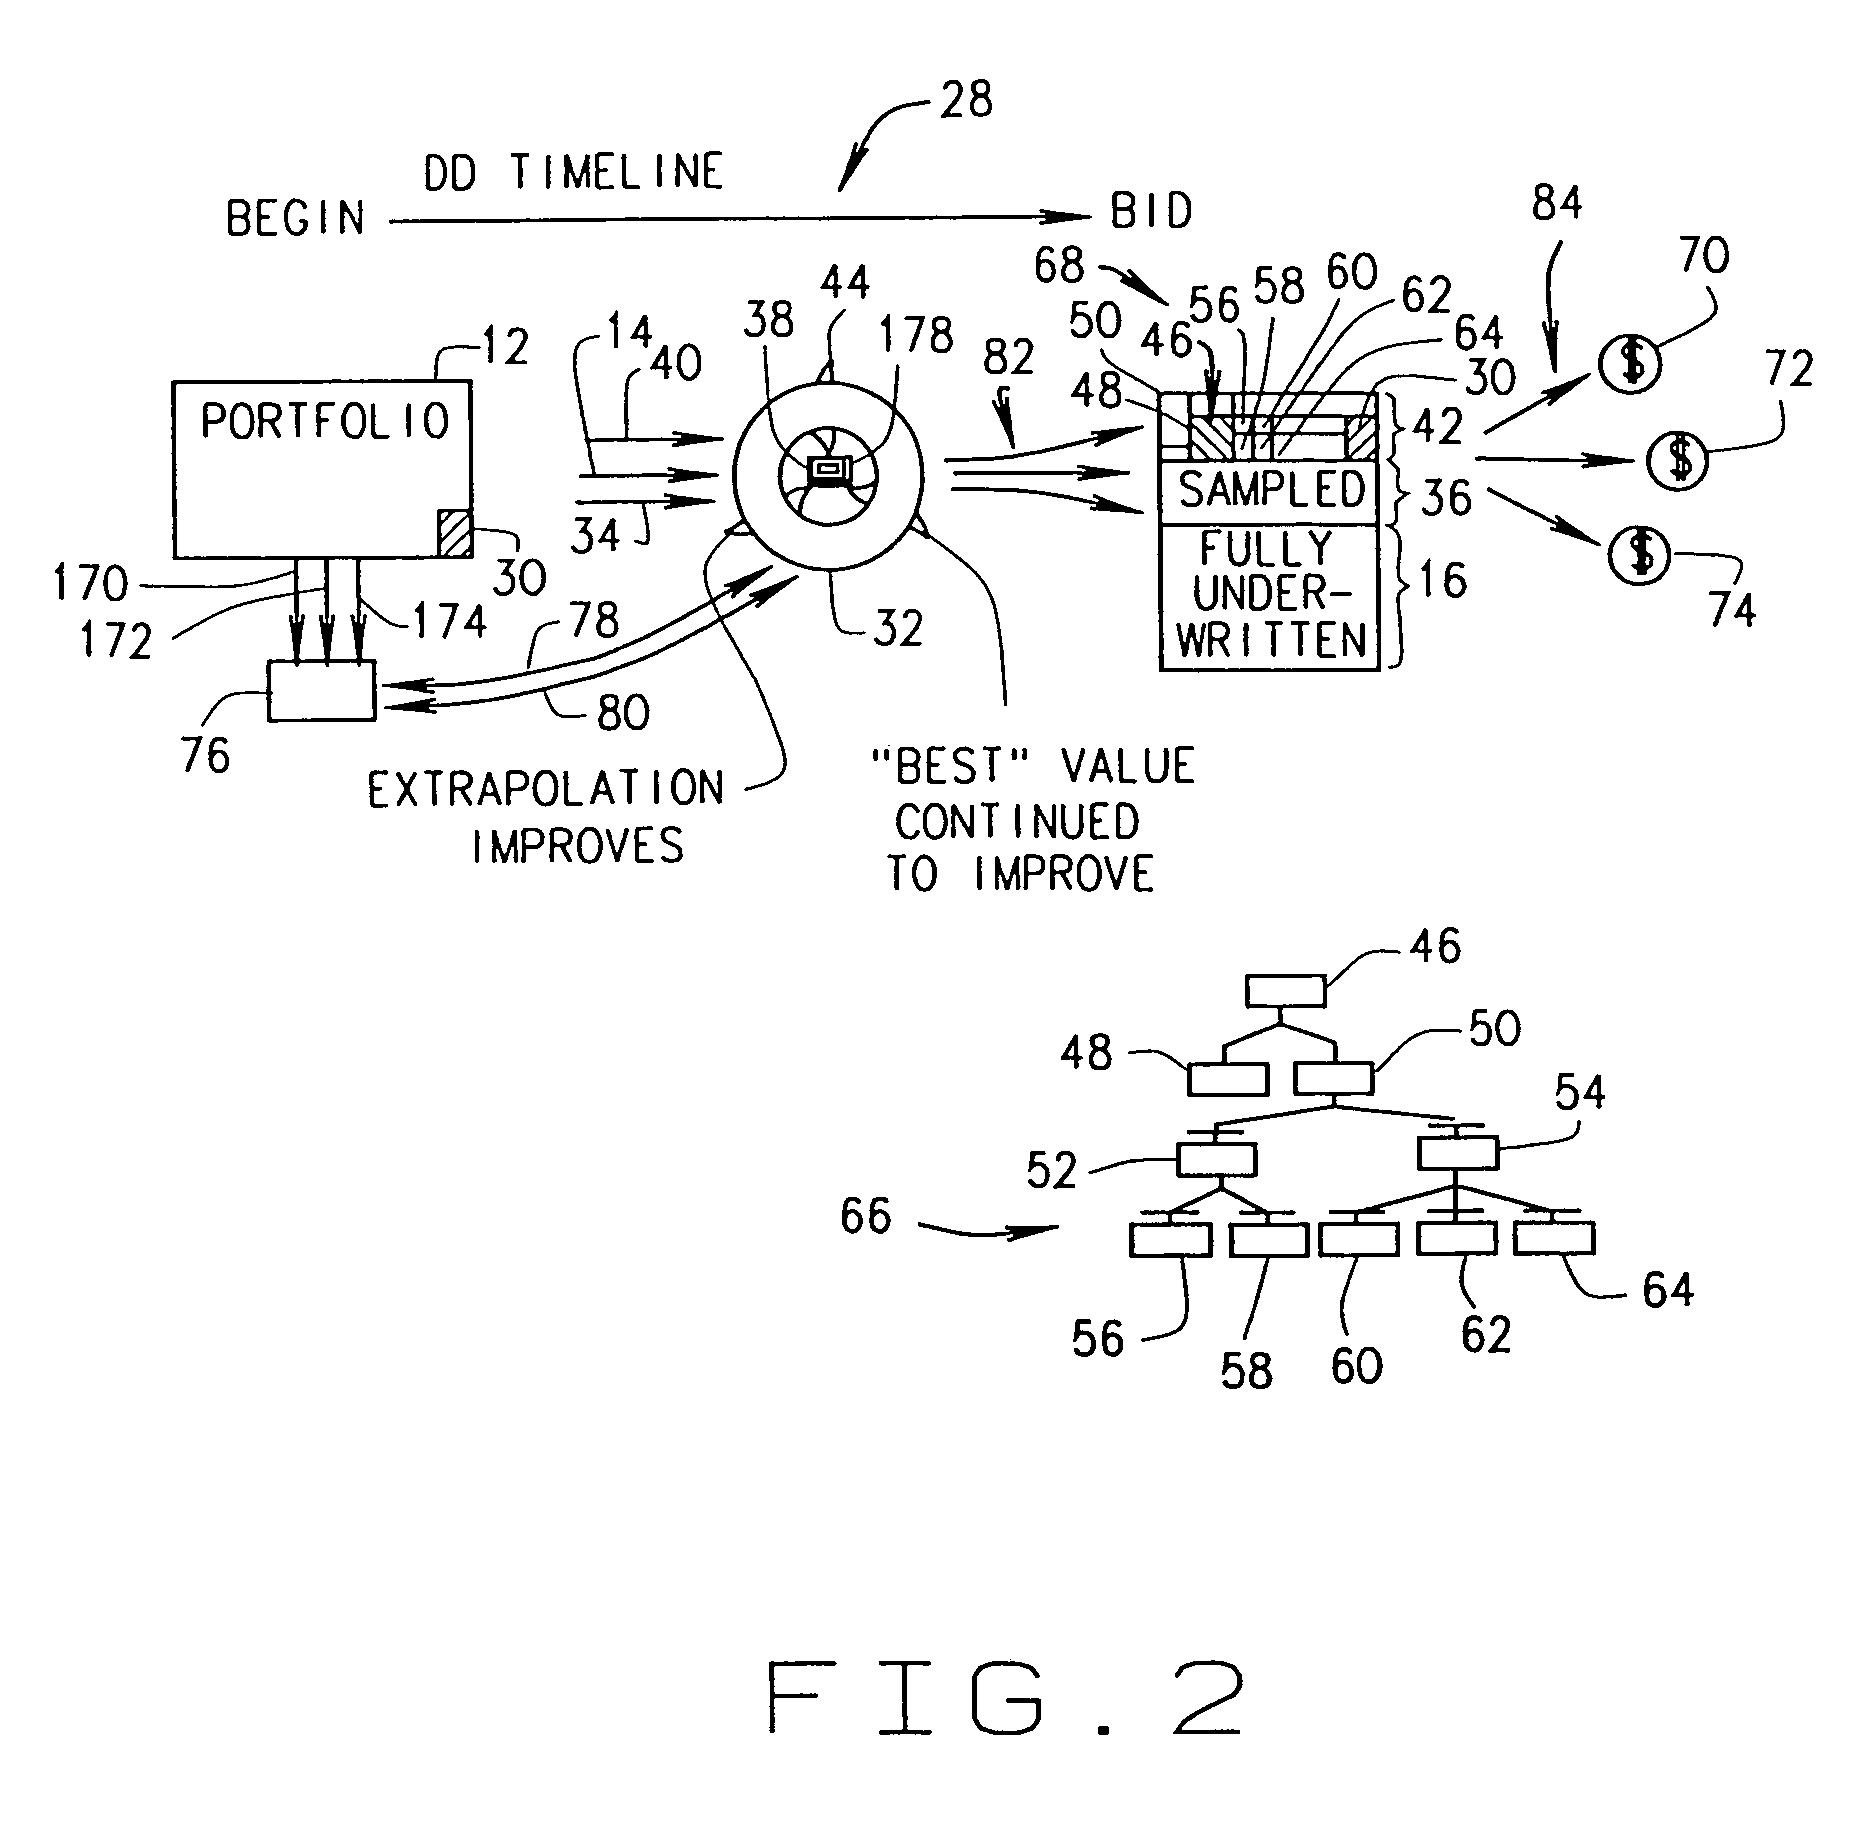 Methods and systems for optimizing return and present value